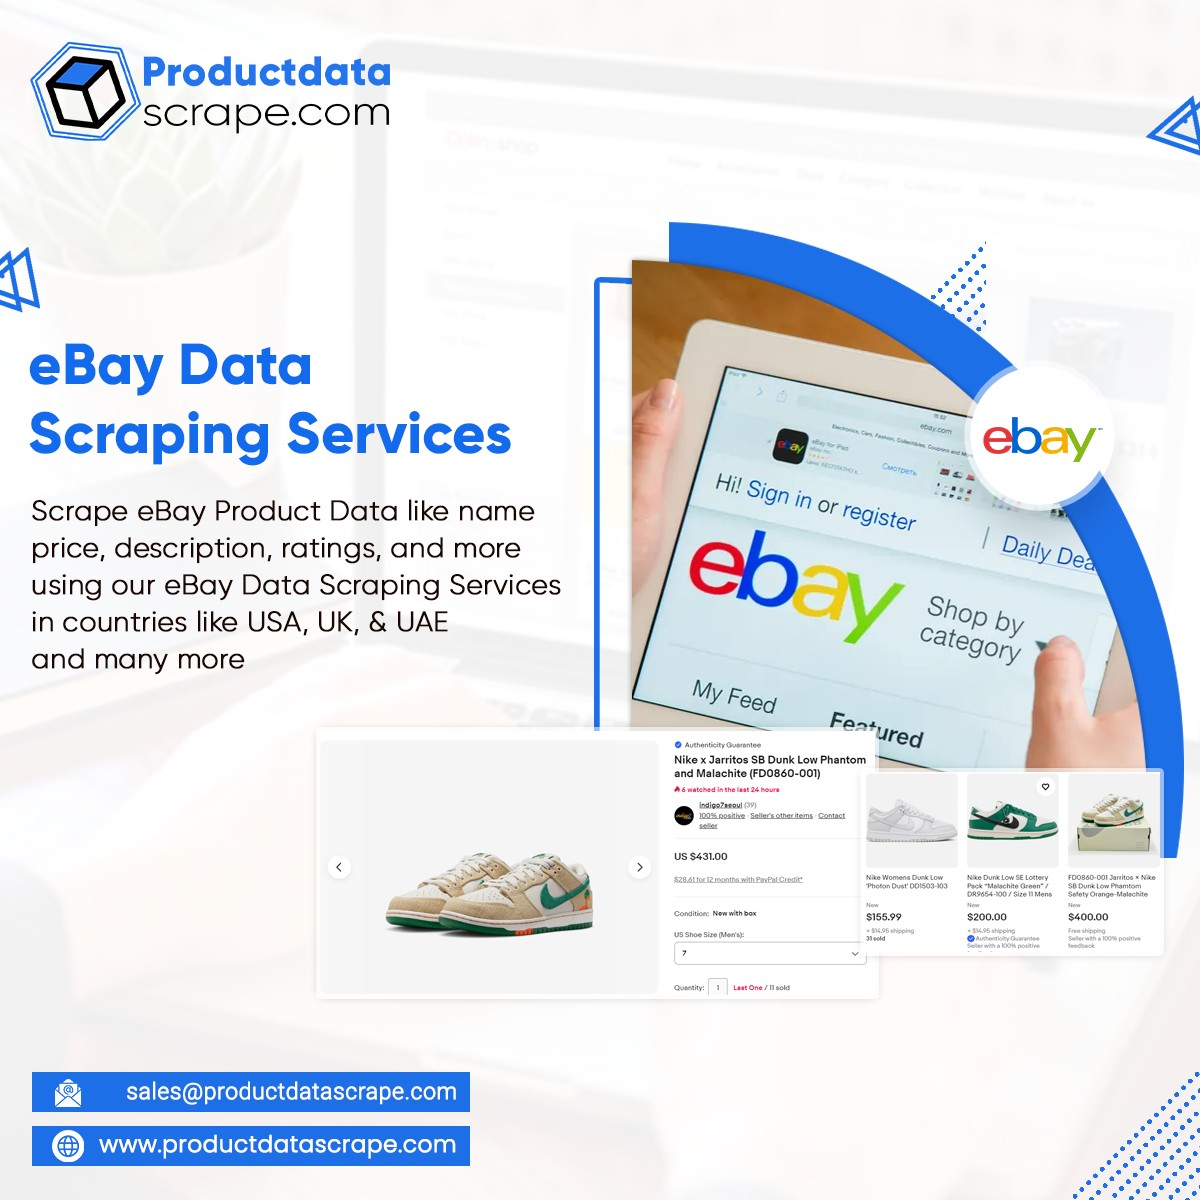 eBay Data Scraping Services